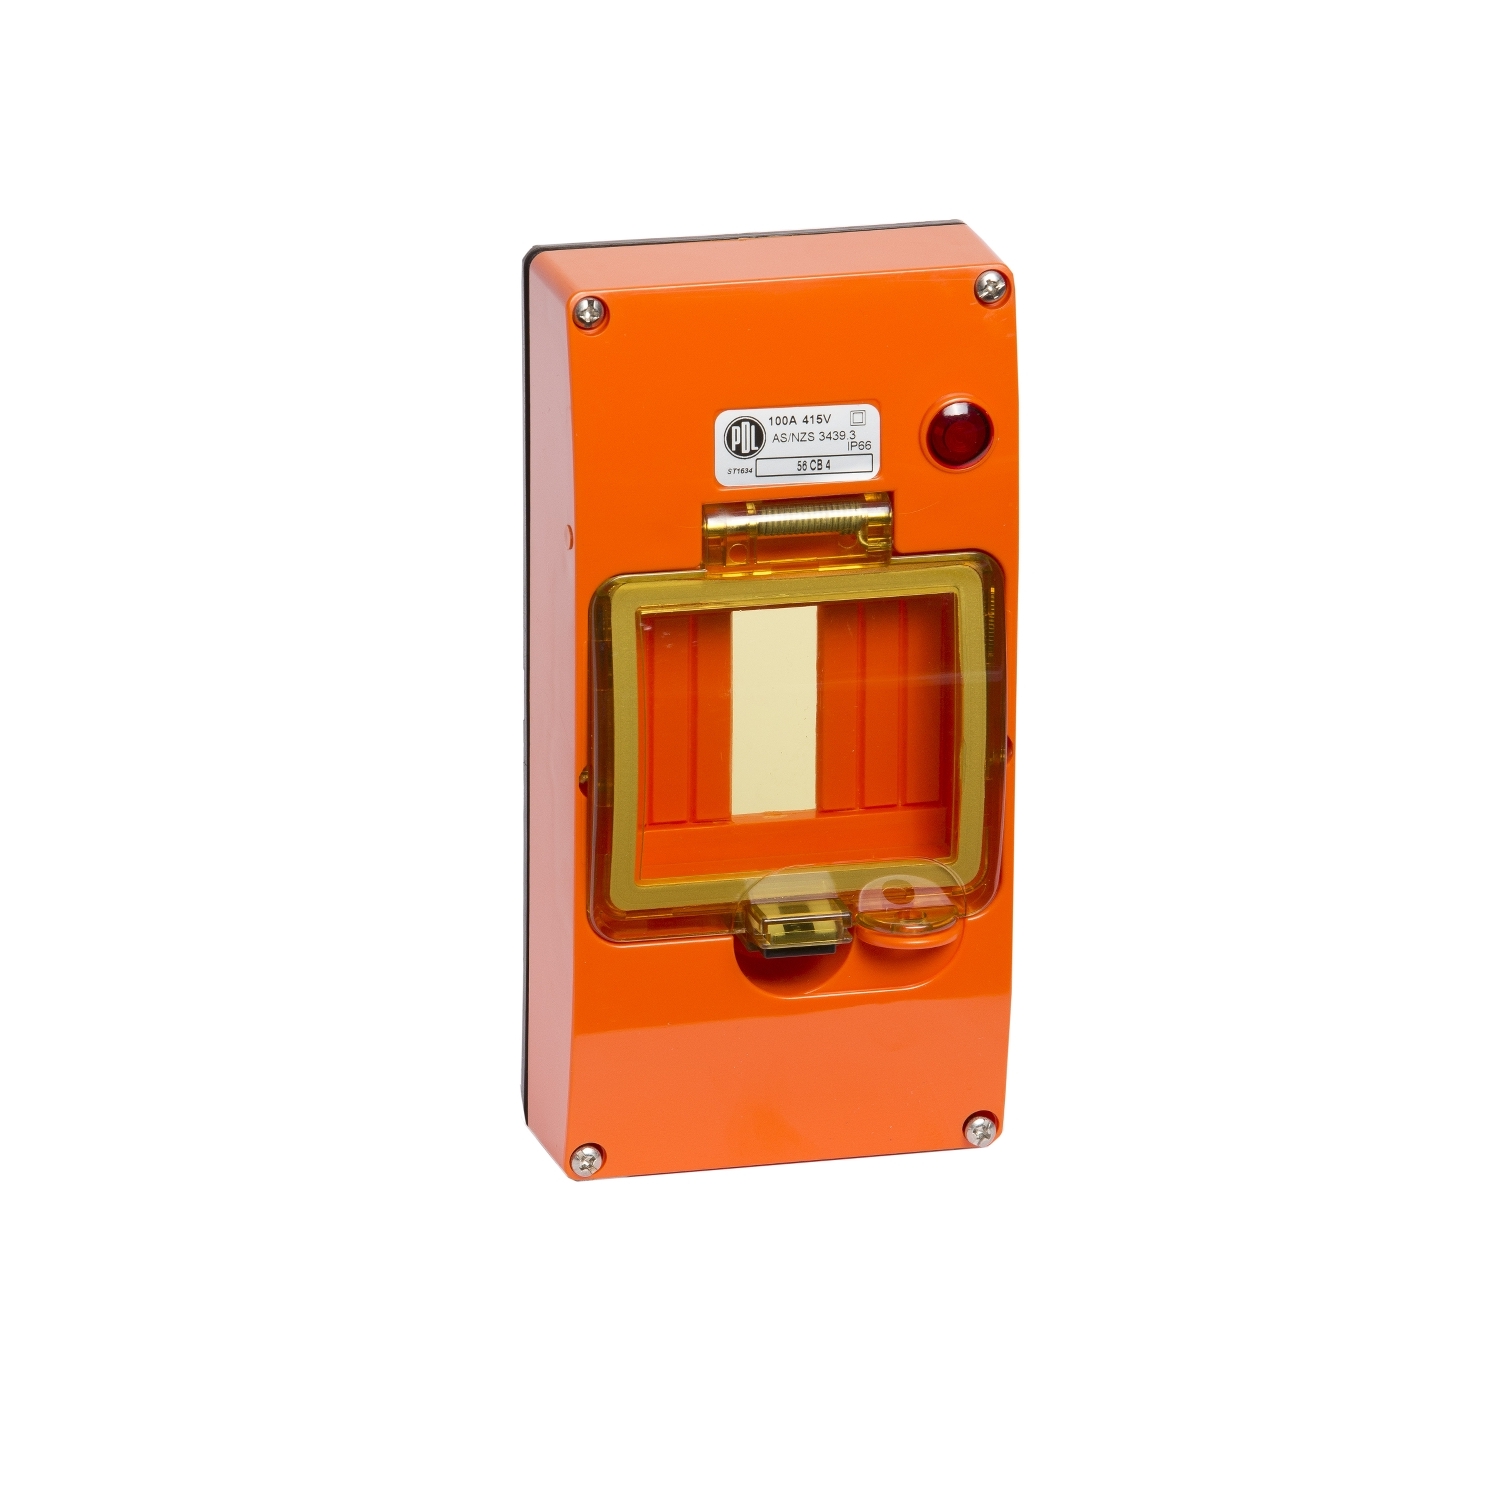 PDL 56 Series - Din Rail MCB RCD Mounting Cover 4-Pole IP66 - Chemical-Resistant Orange